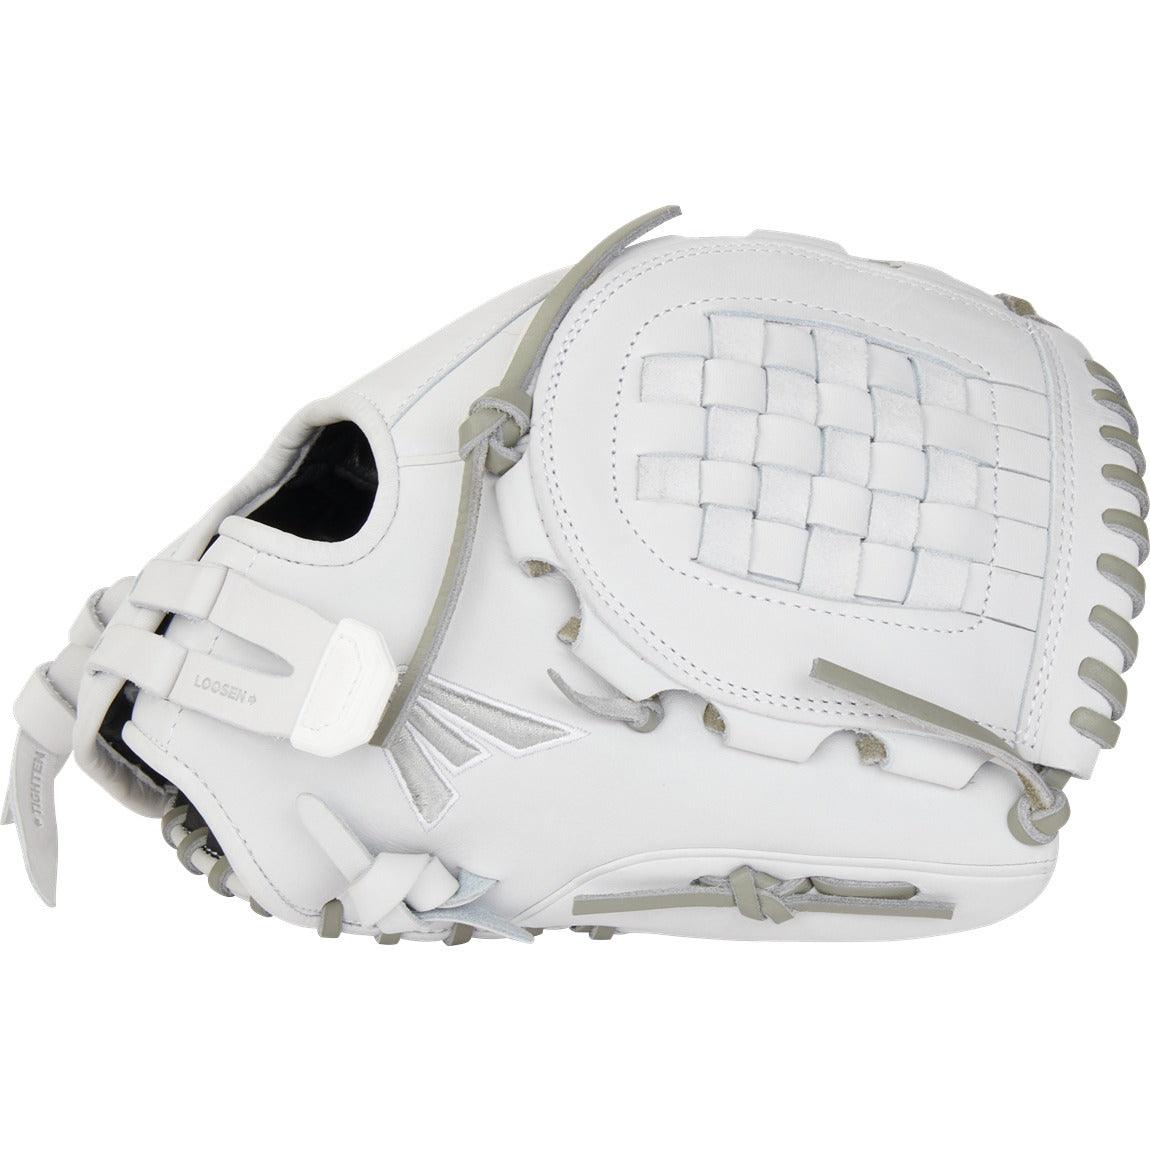 2024 Easton Pro Collection 12" Fastpitch Softball Glove